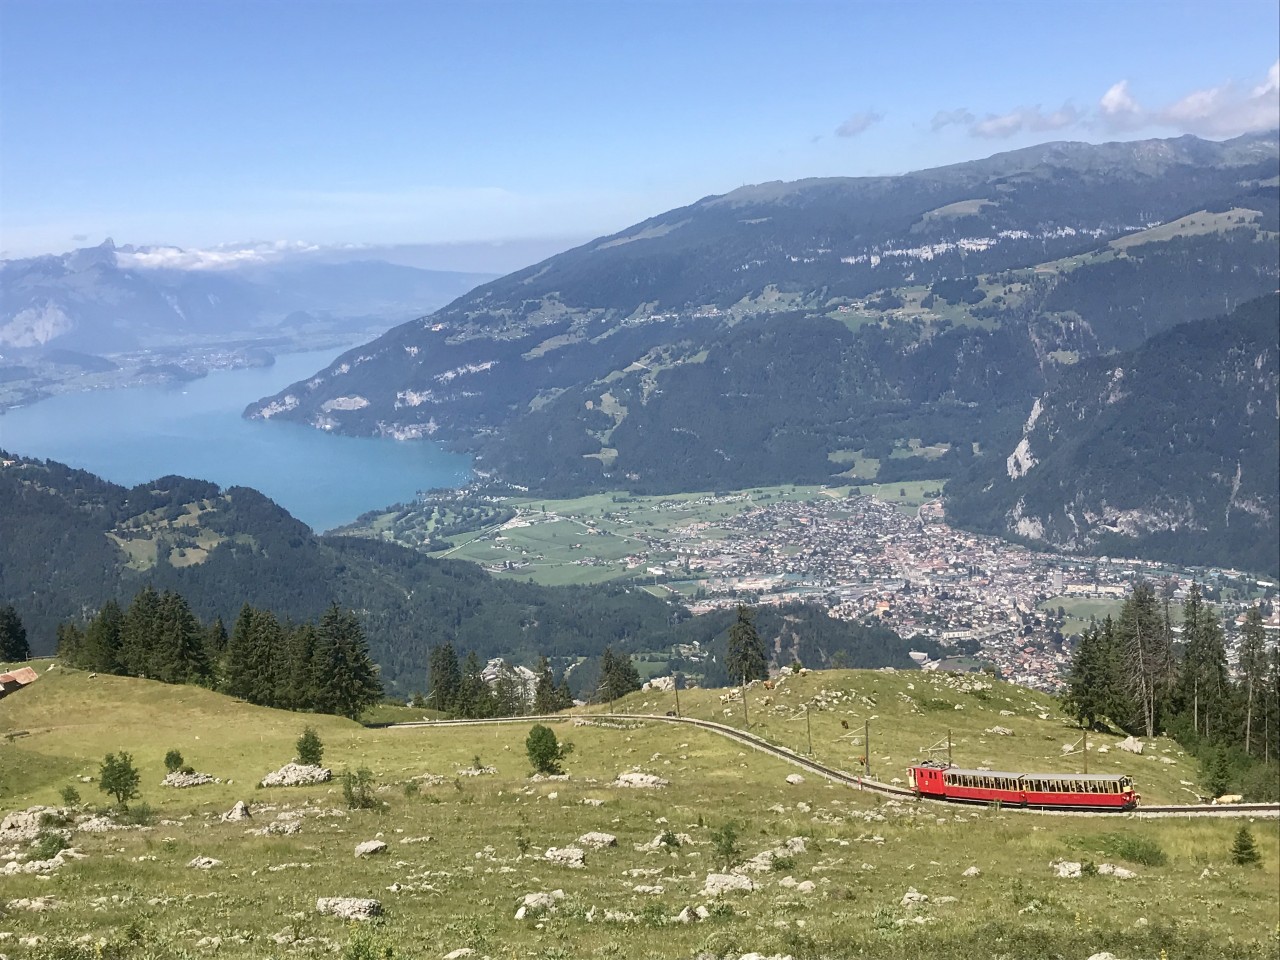 Alpine train journeys can be truly stunning!